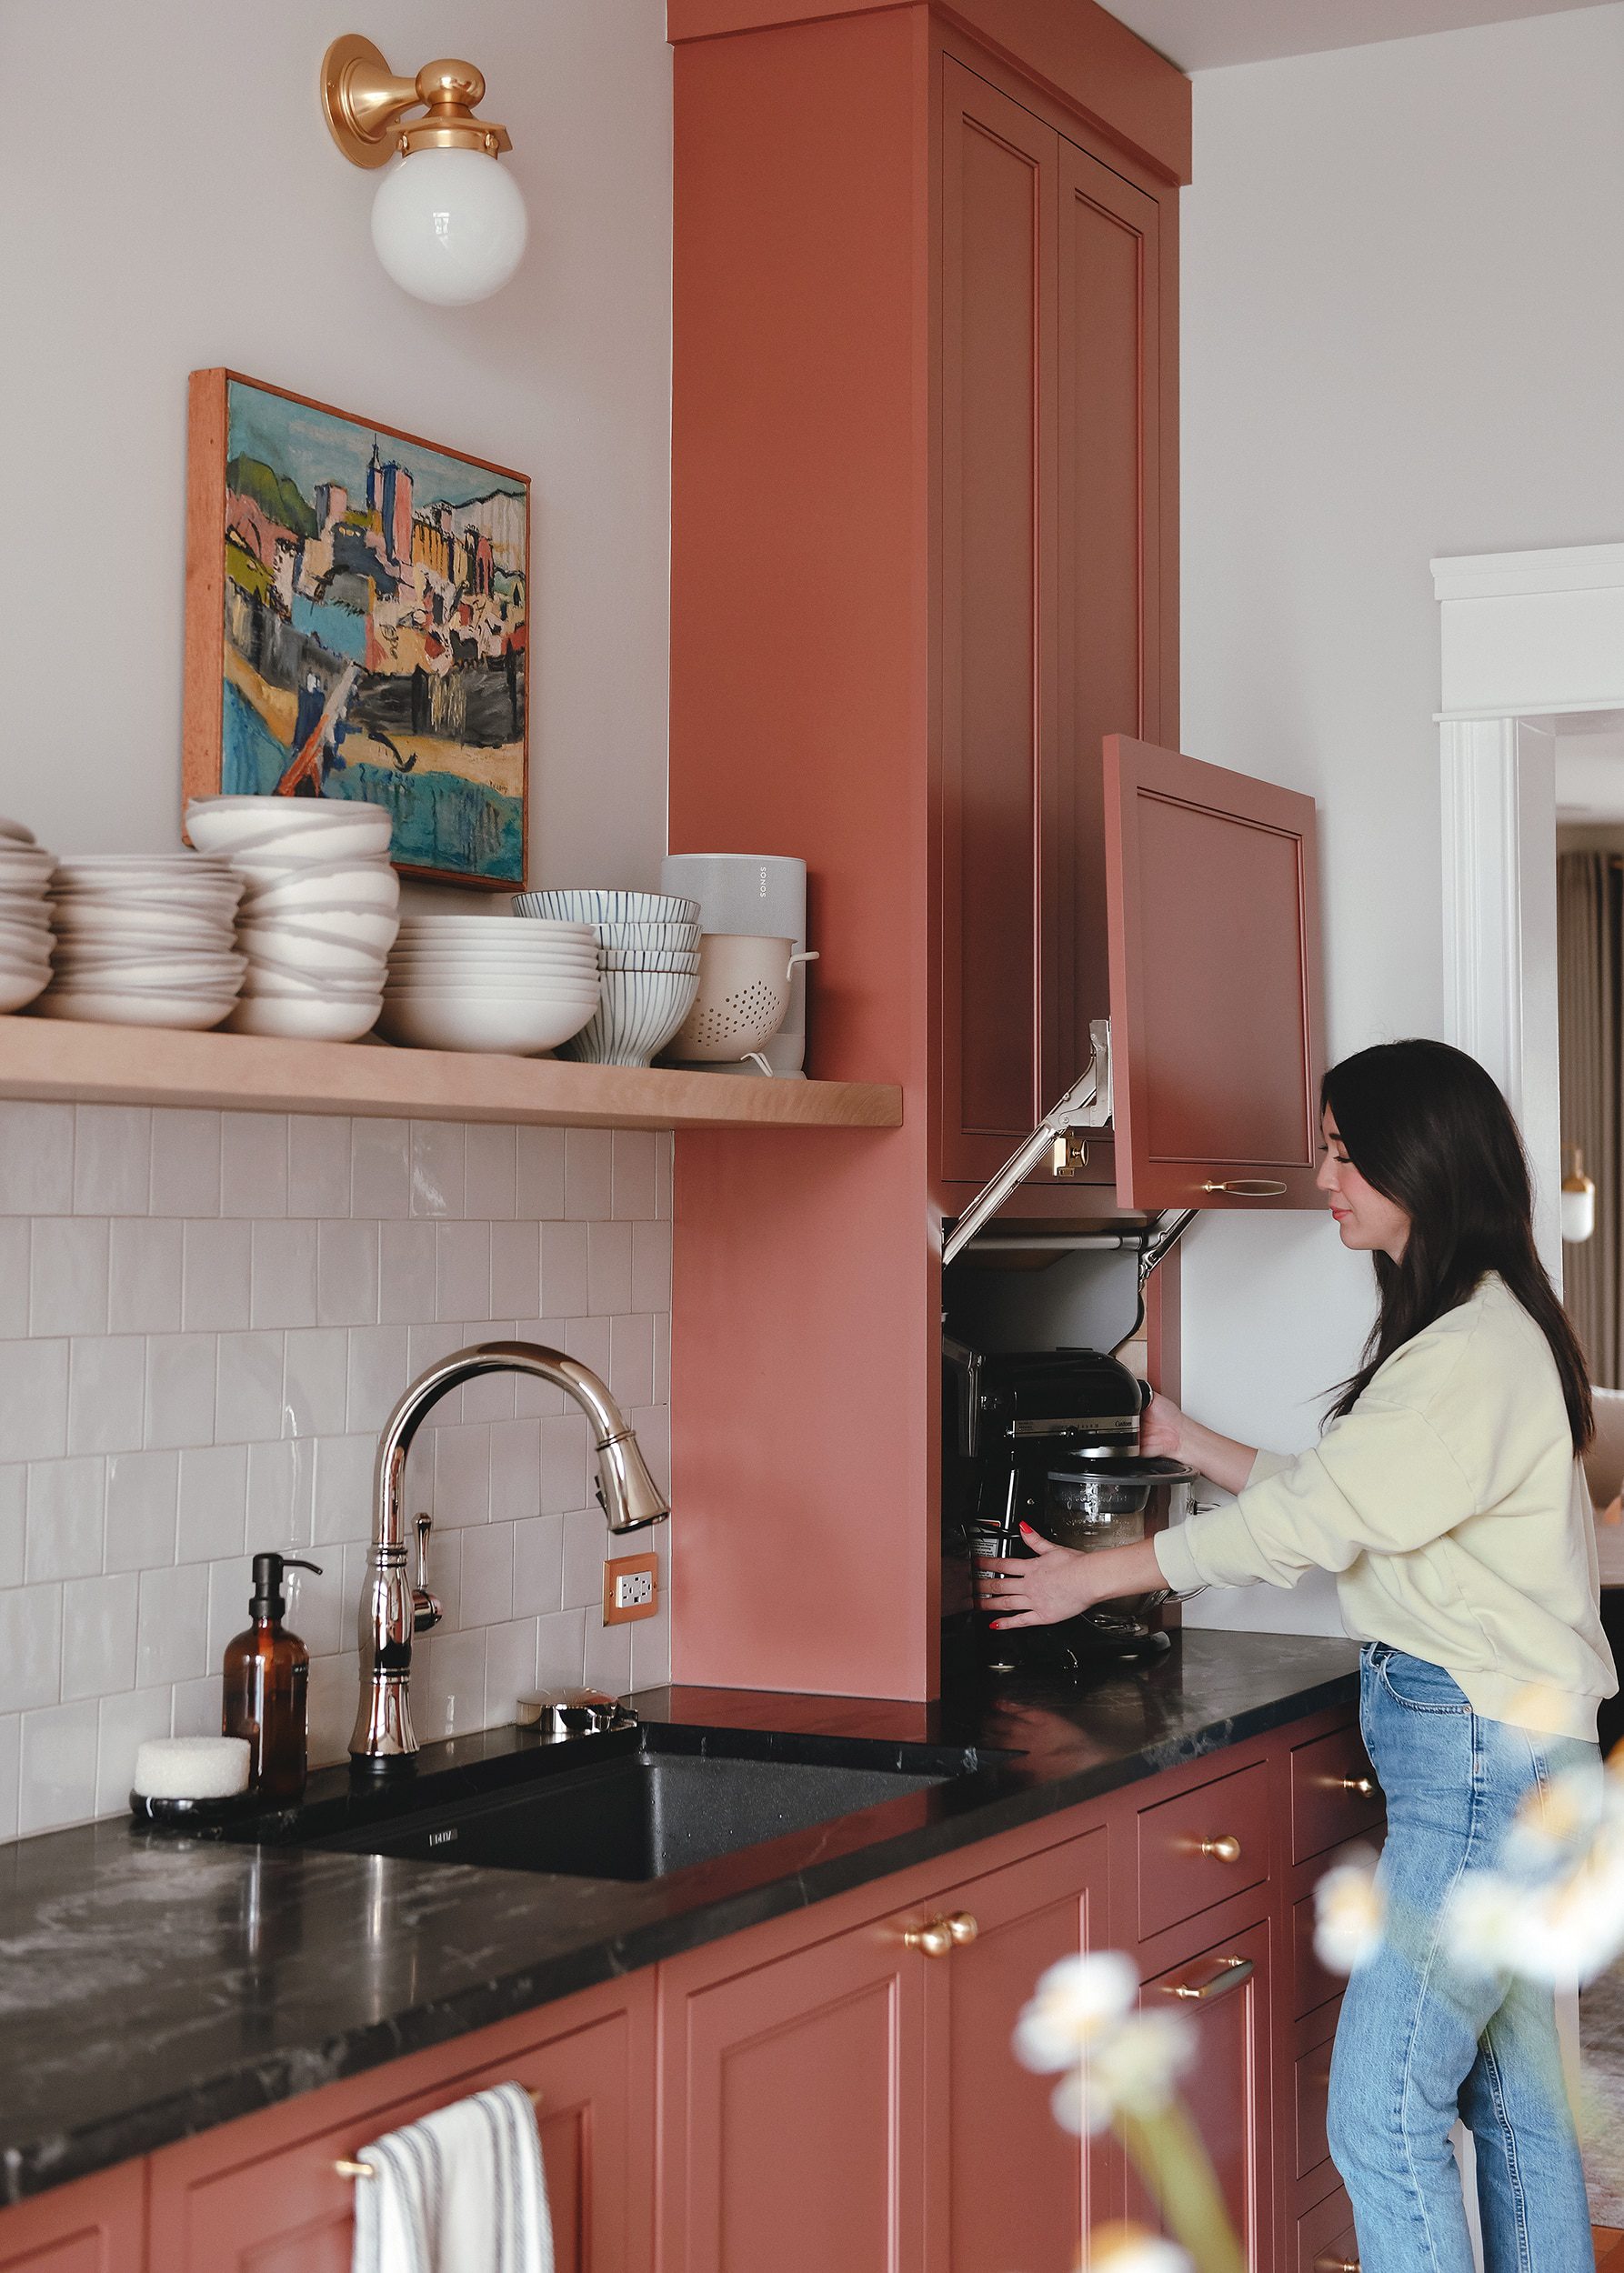 Kim removes our stand mixer from the appliance garage in our newly renovated kitchen // via yellow brick home